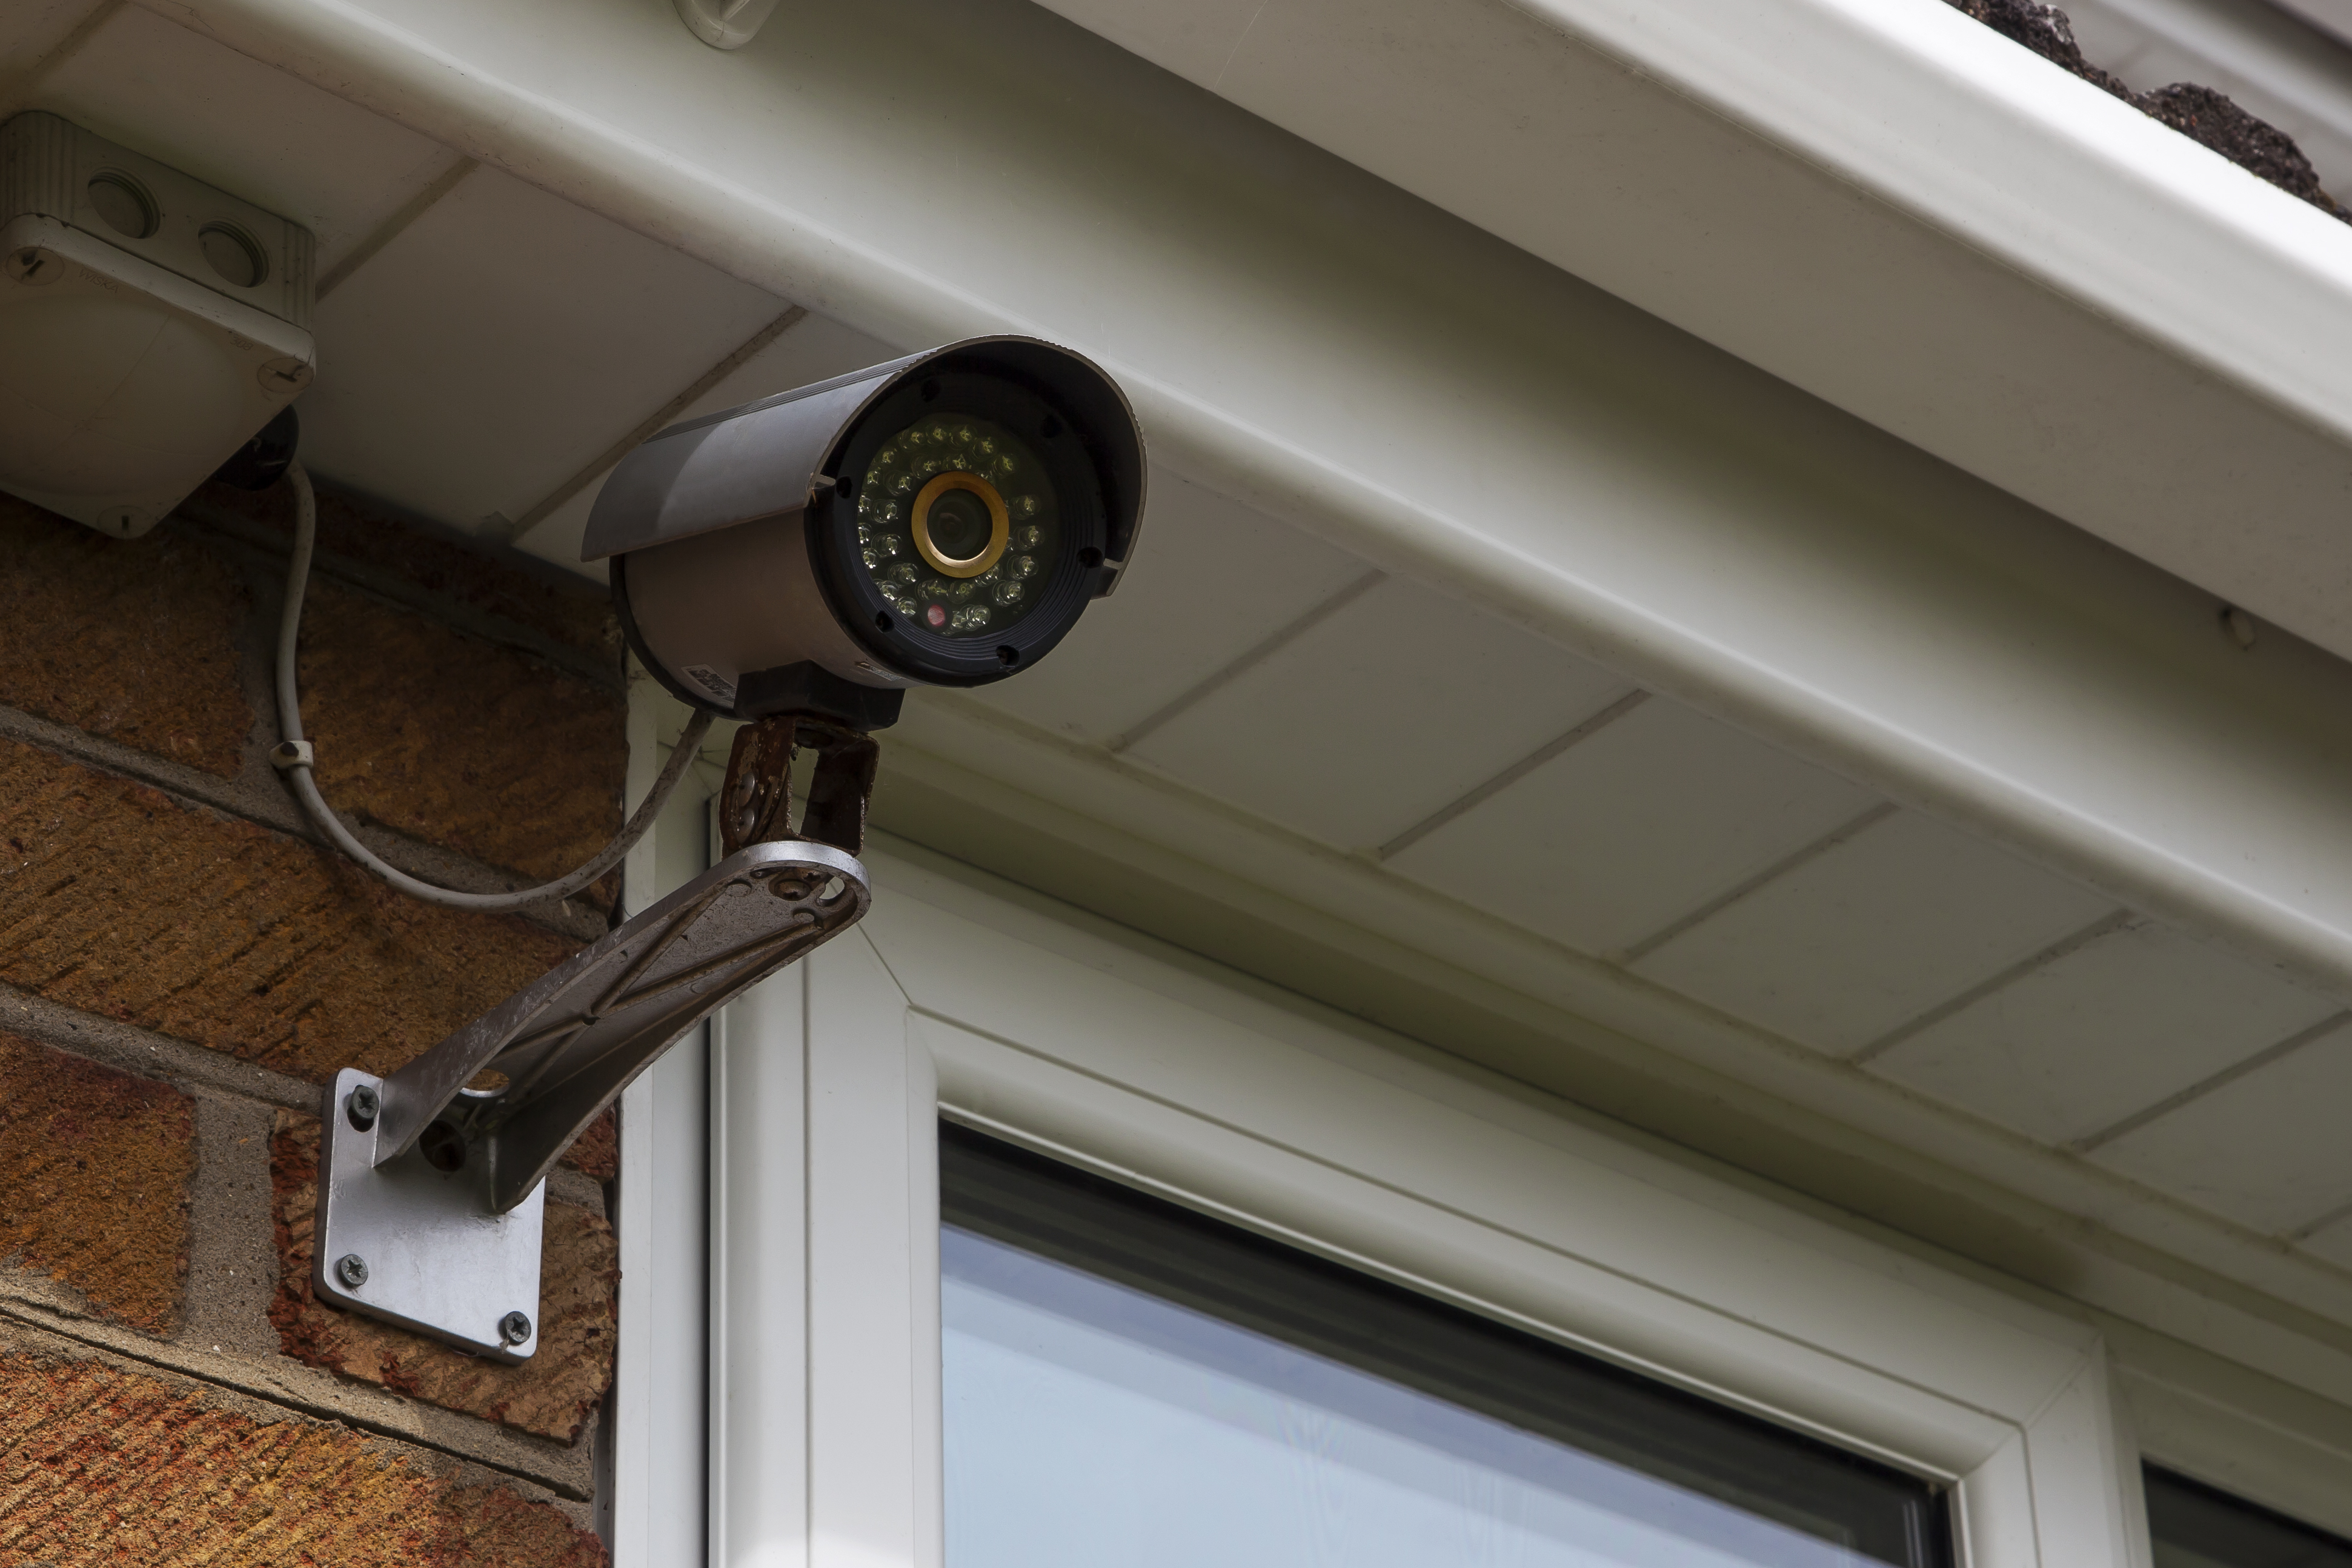 Security Lock Systems CCTV Security Installation In Tampa 813-874-1608